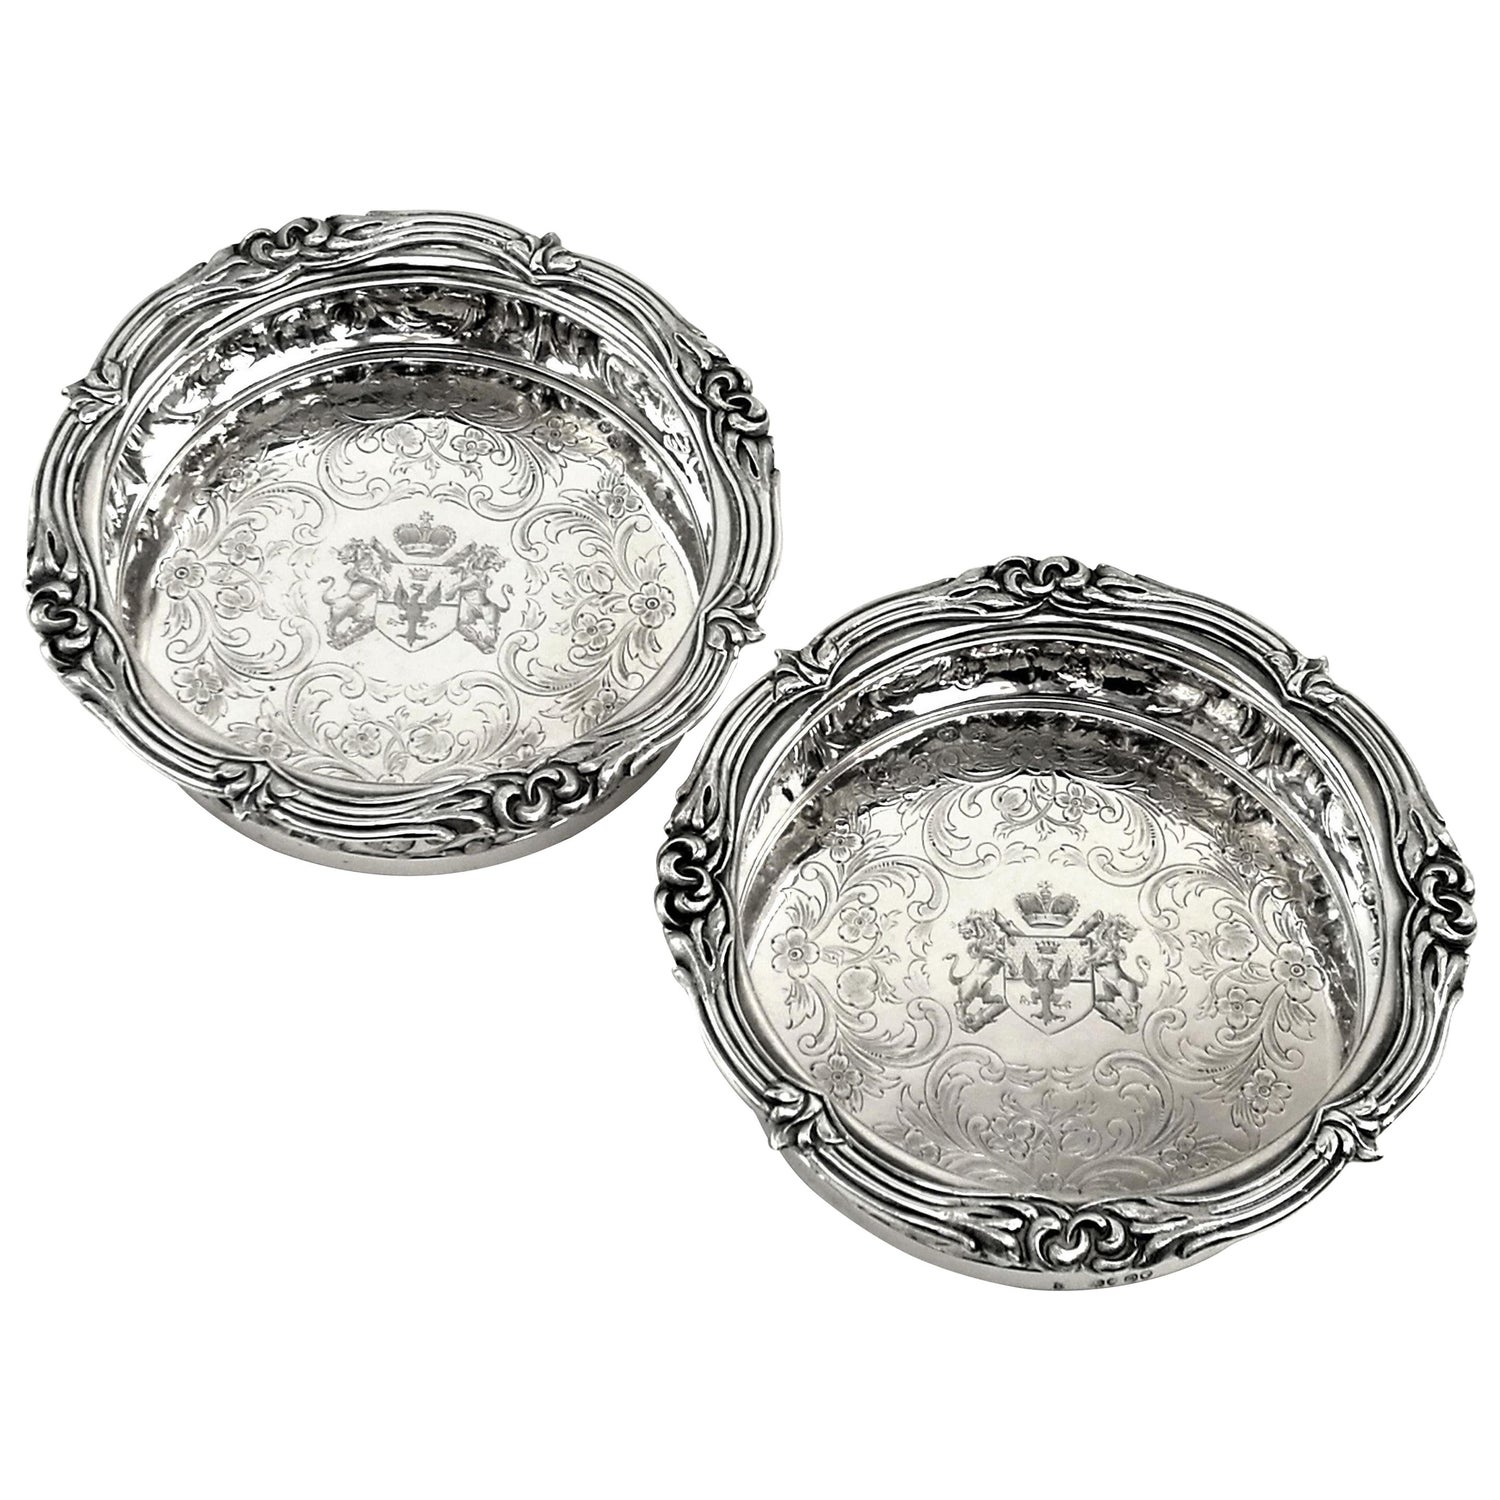 Pair of Antique Victorian Sterling Silver Wine Bottle Coasters 1839